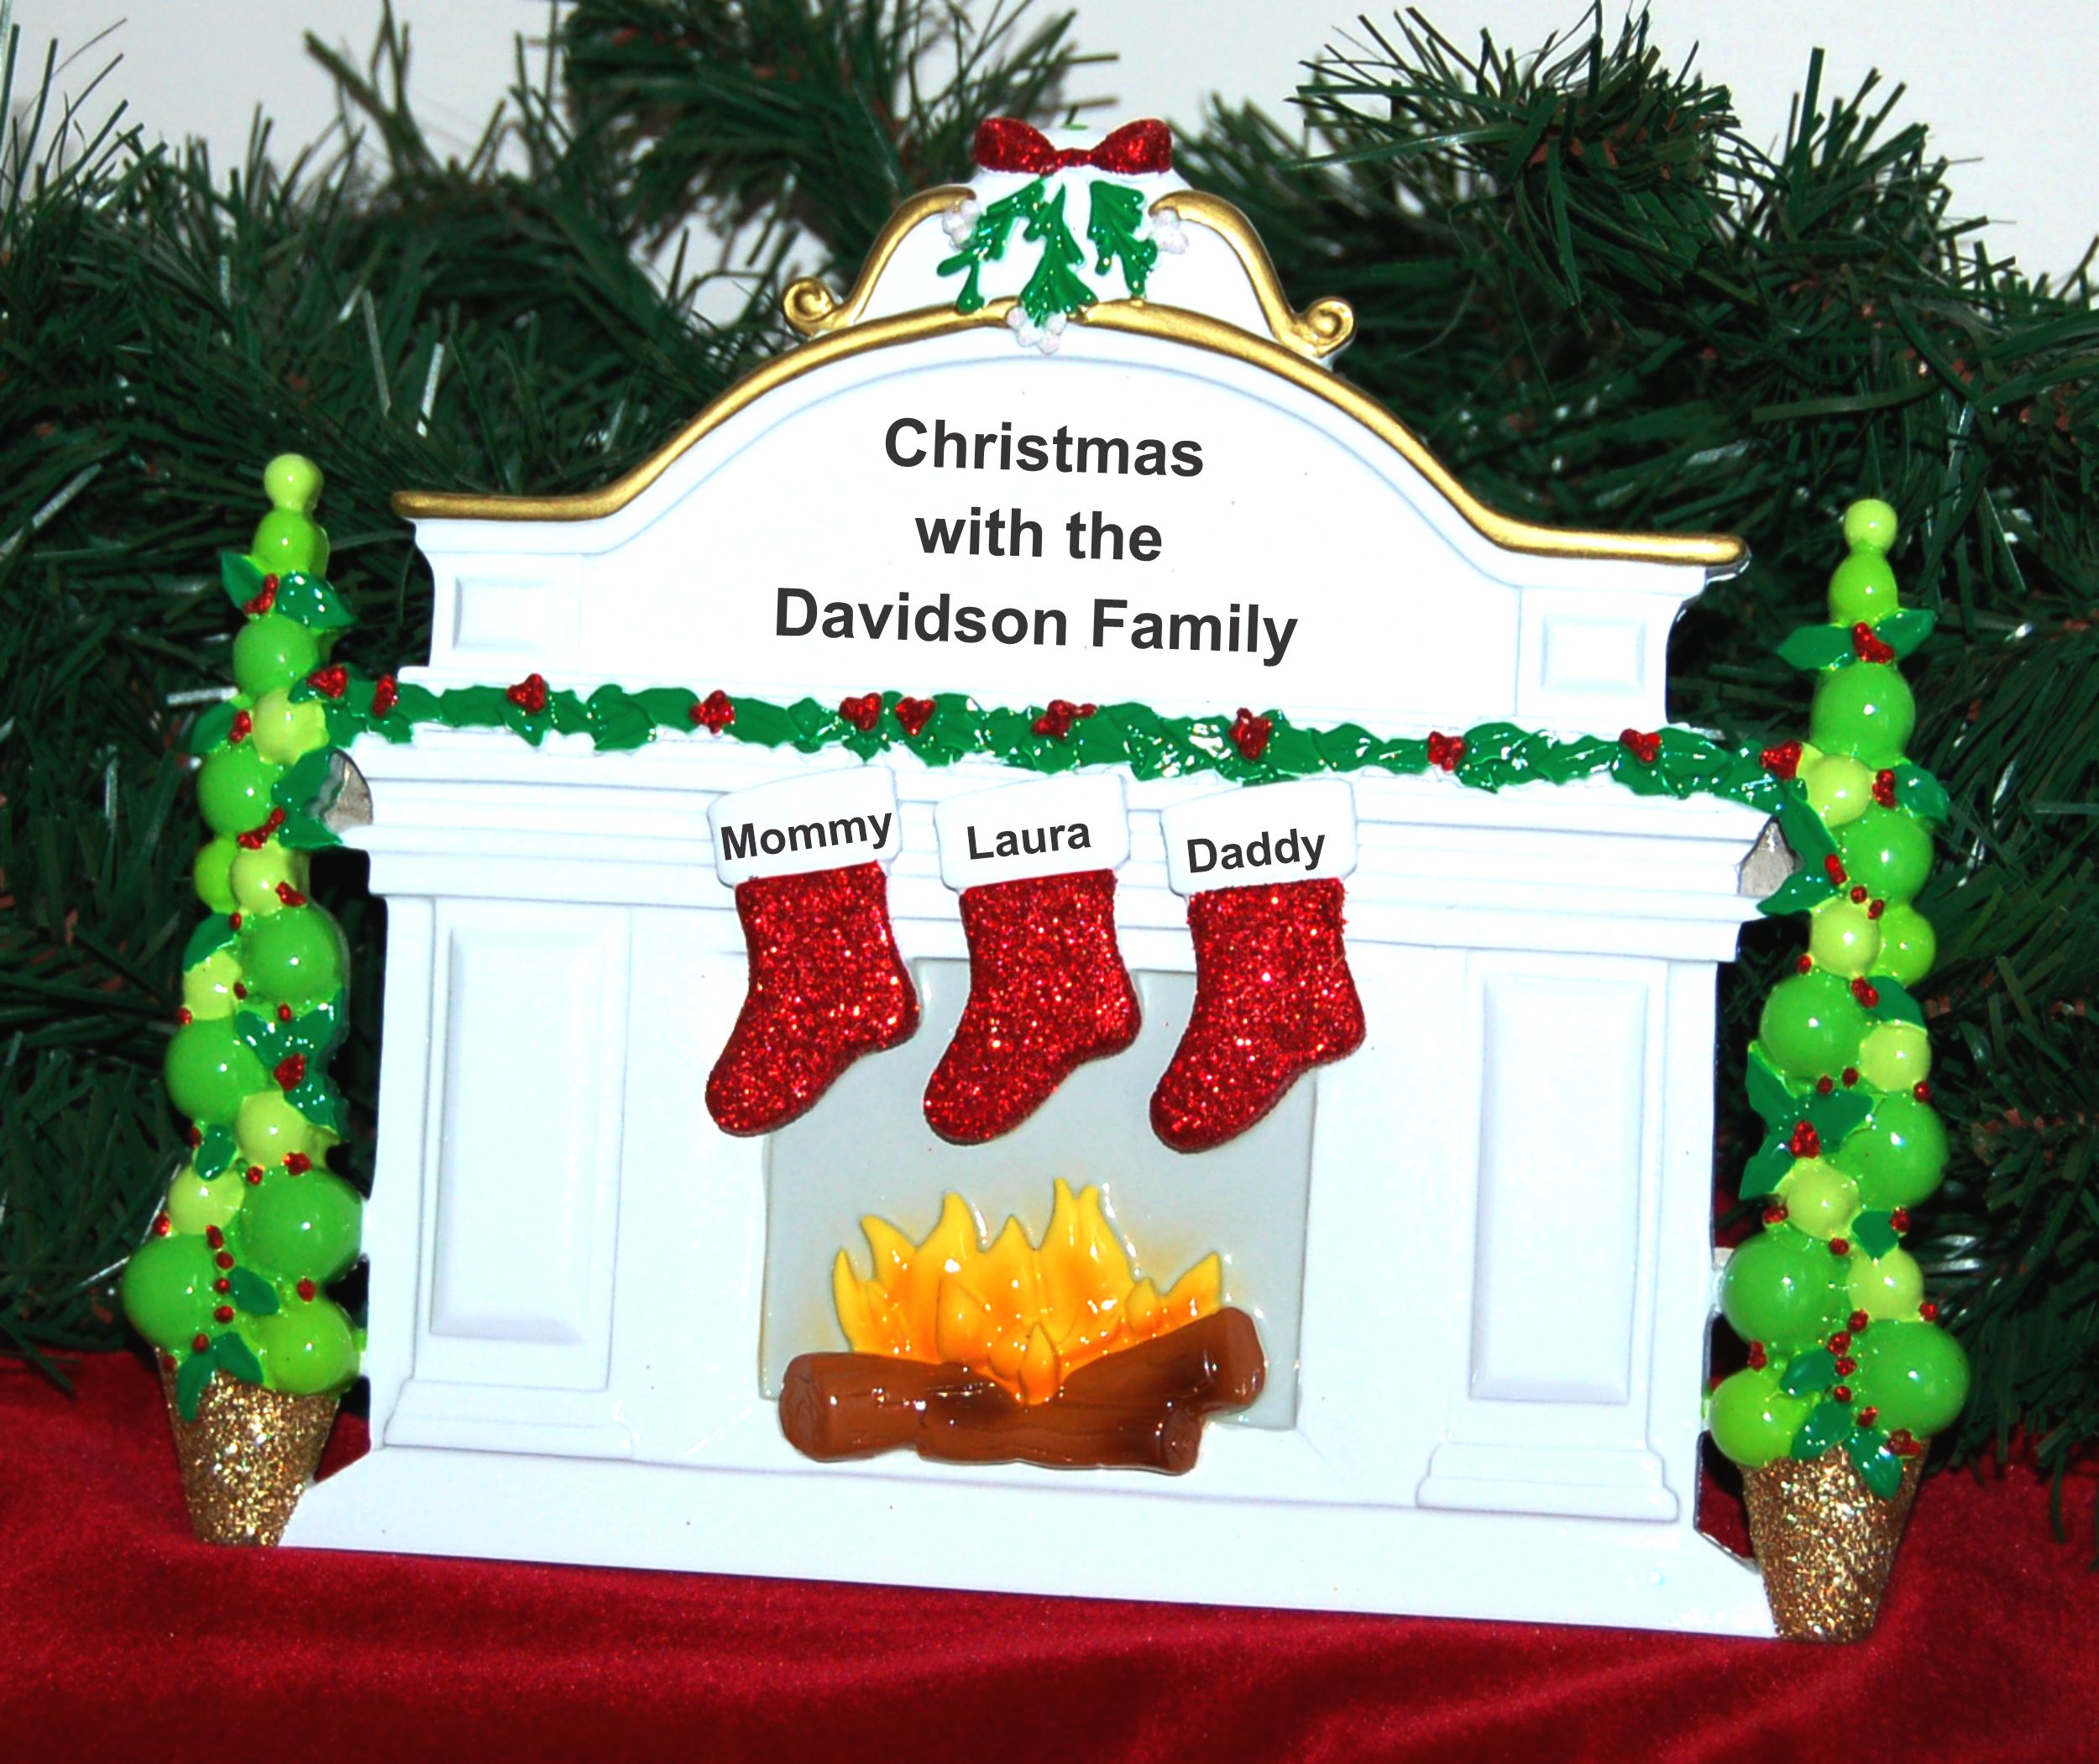 Family Tabletop Christmas Decoration Mantel Family 3 Personalized by RussellRhodes.com